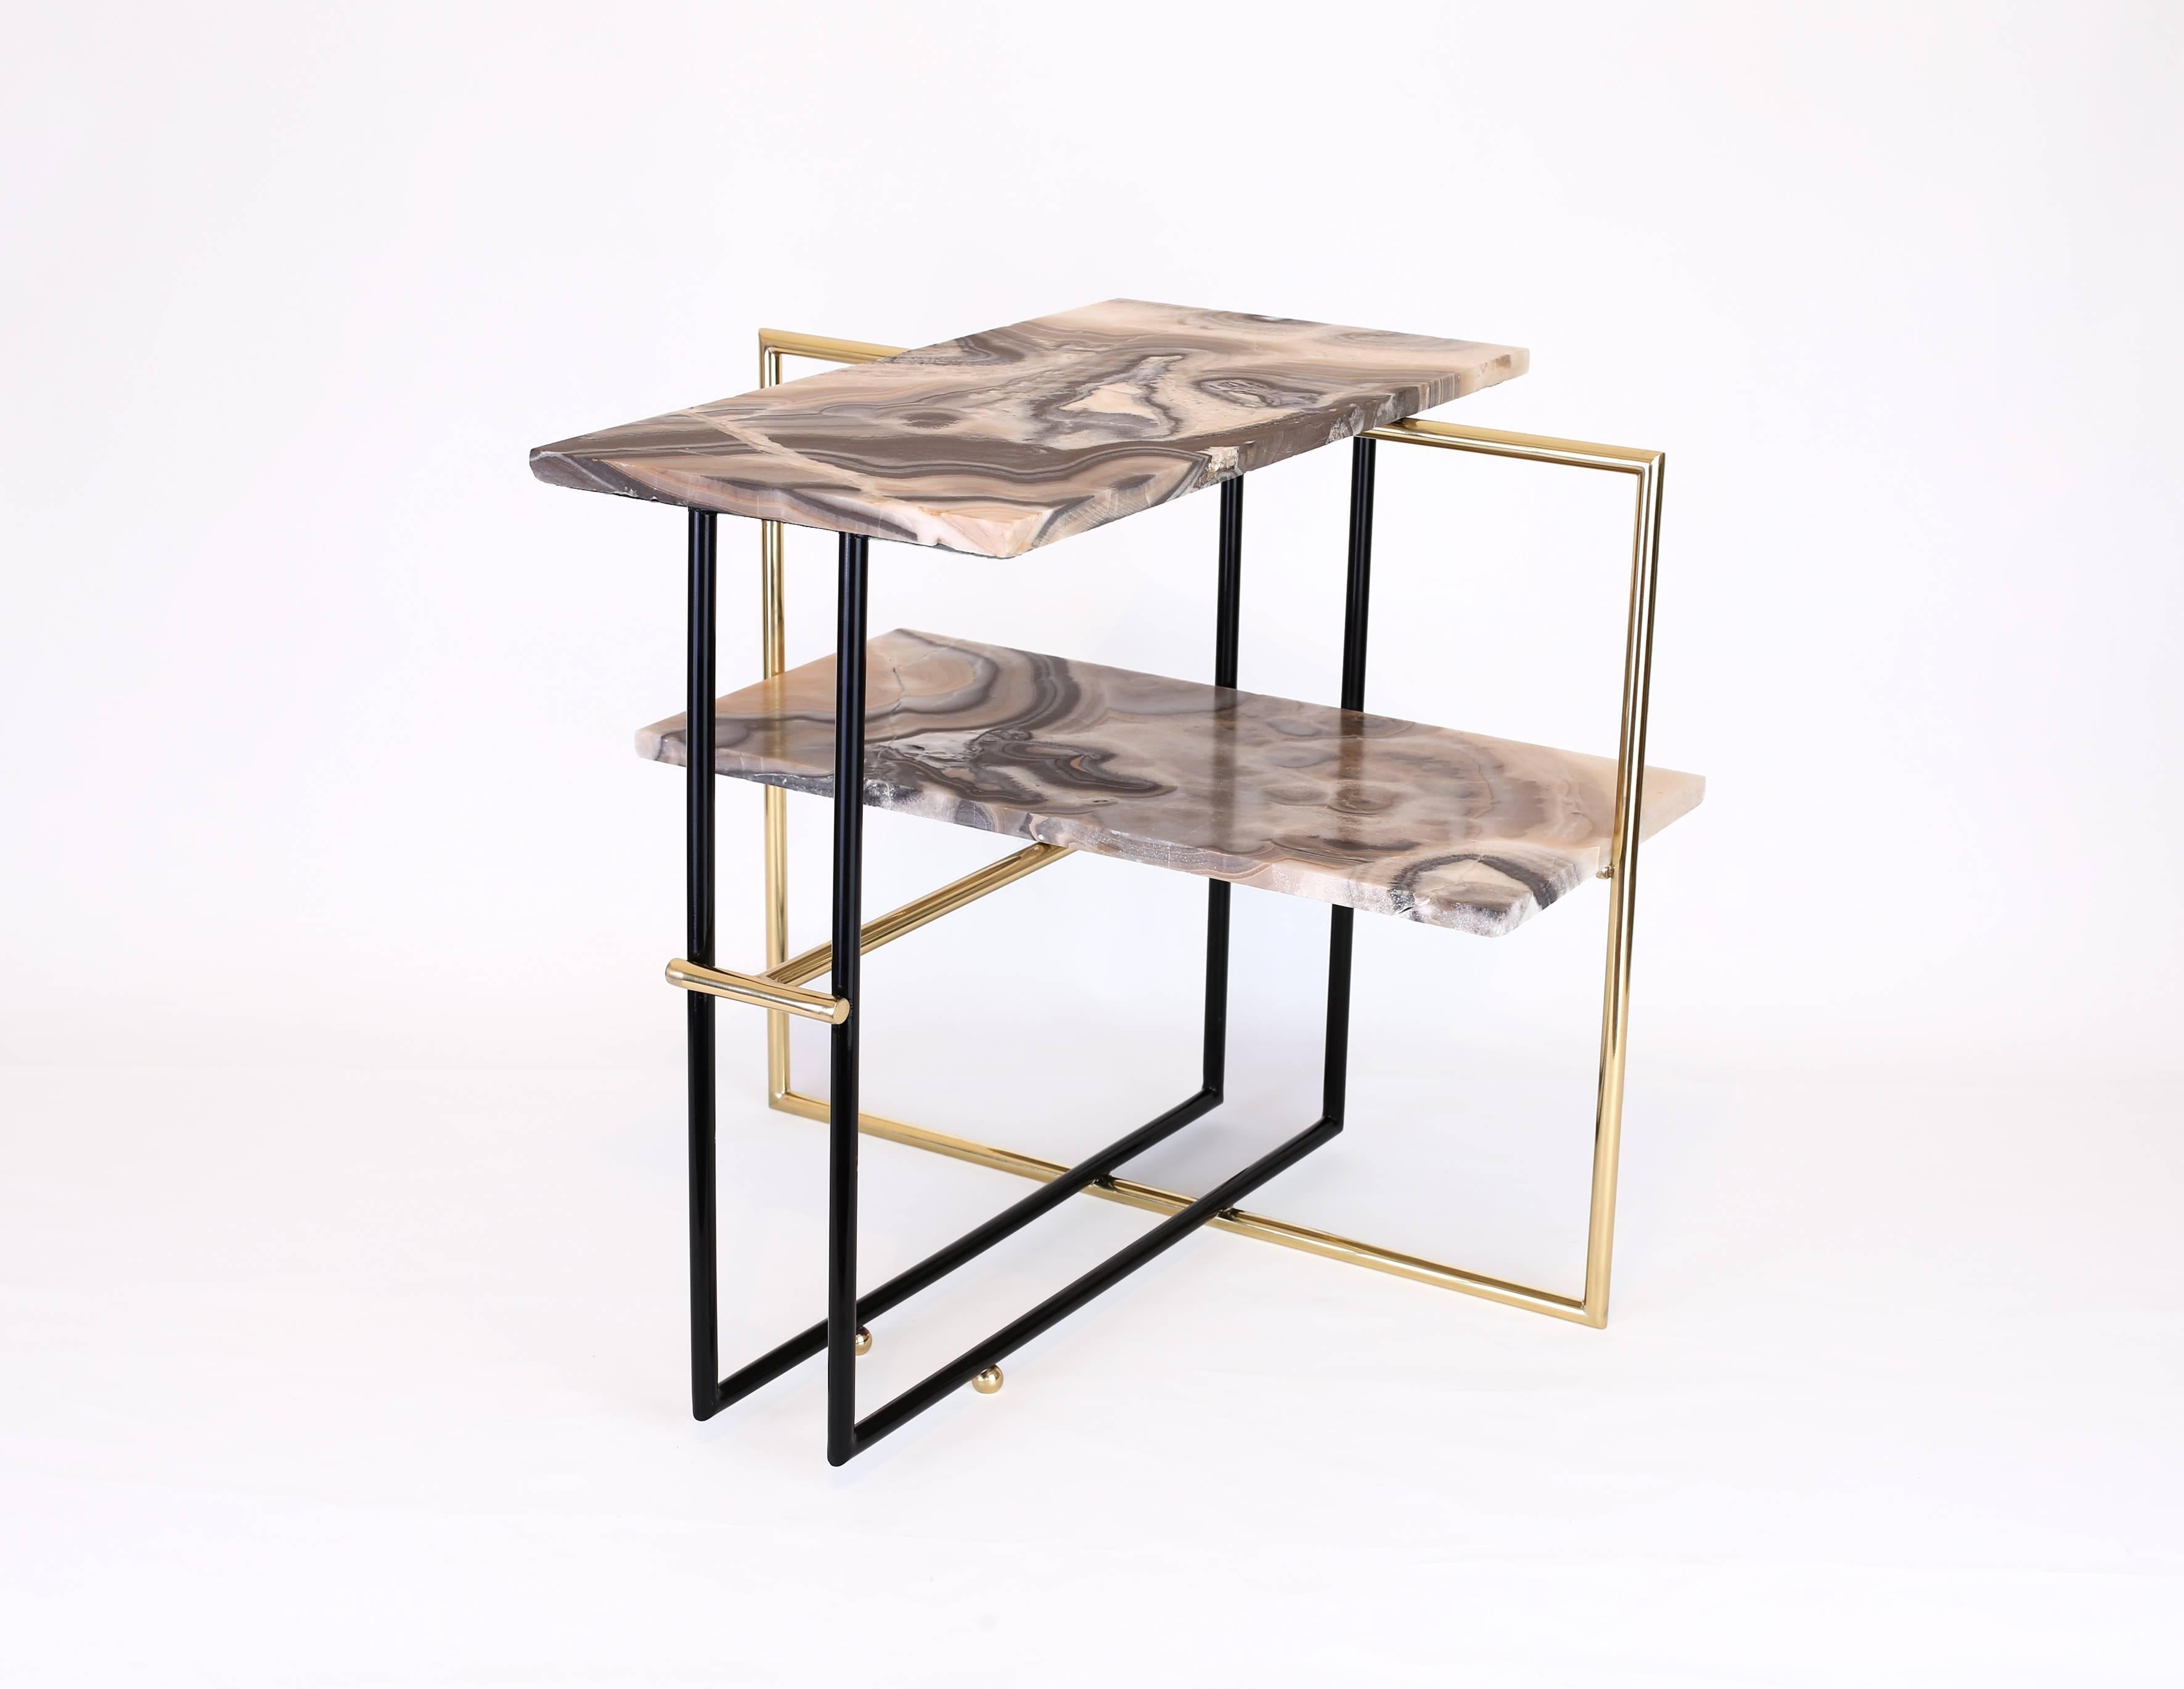 The UÑA table is fable, mythology and design blended together. The striking contrast between the stone’s solid weight and the apparent frailty of its legs make for a most intriguing game of tension and levity. The name derived from the Greek word